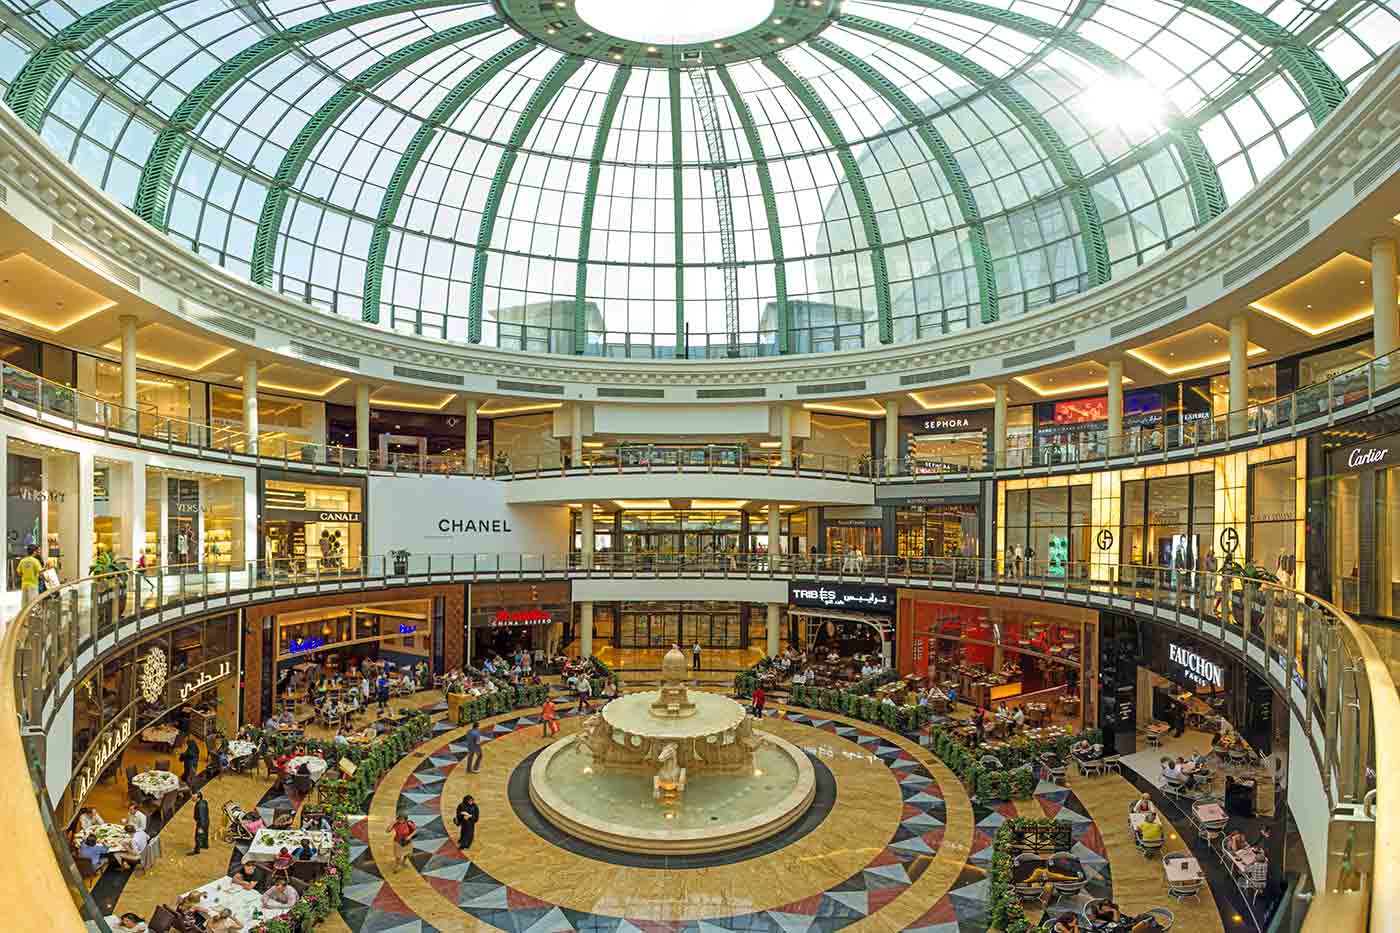 Mall of The Emirates